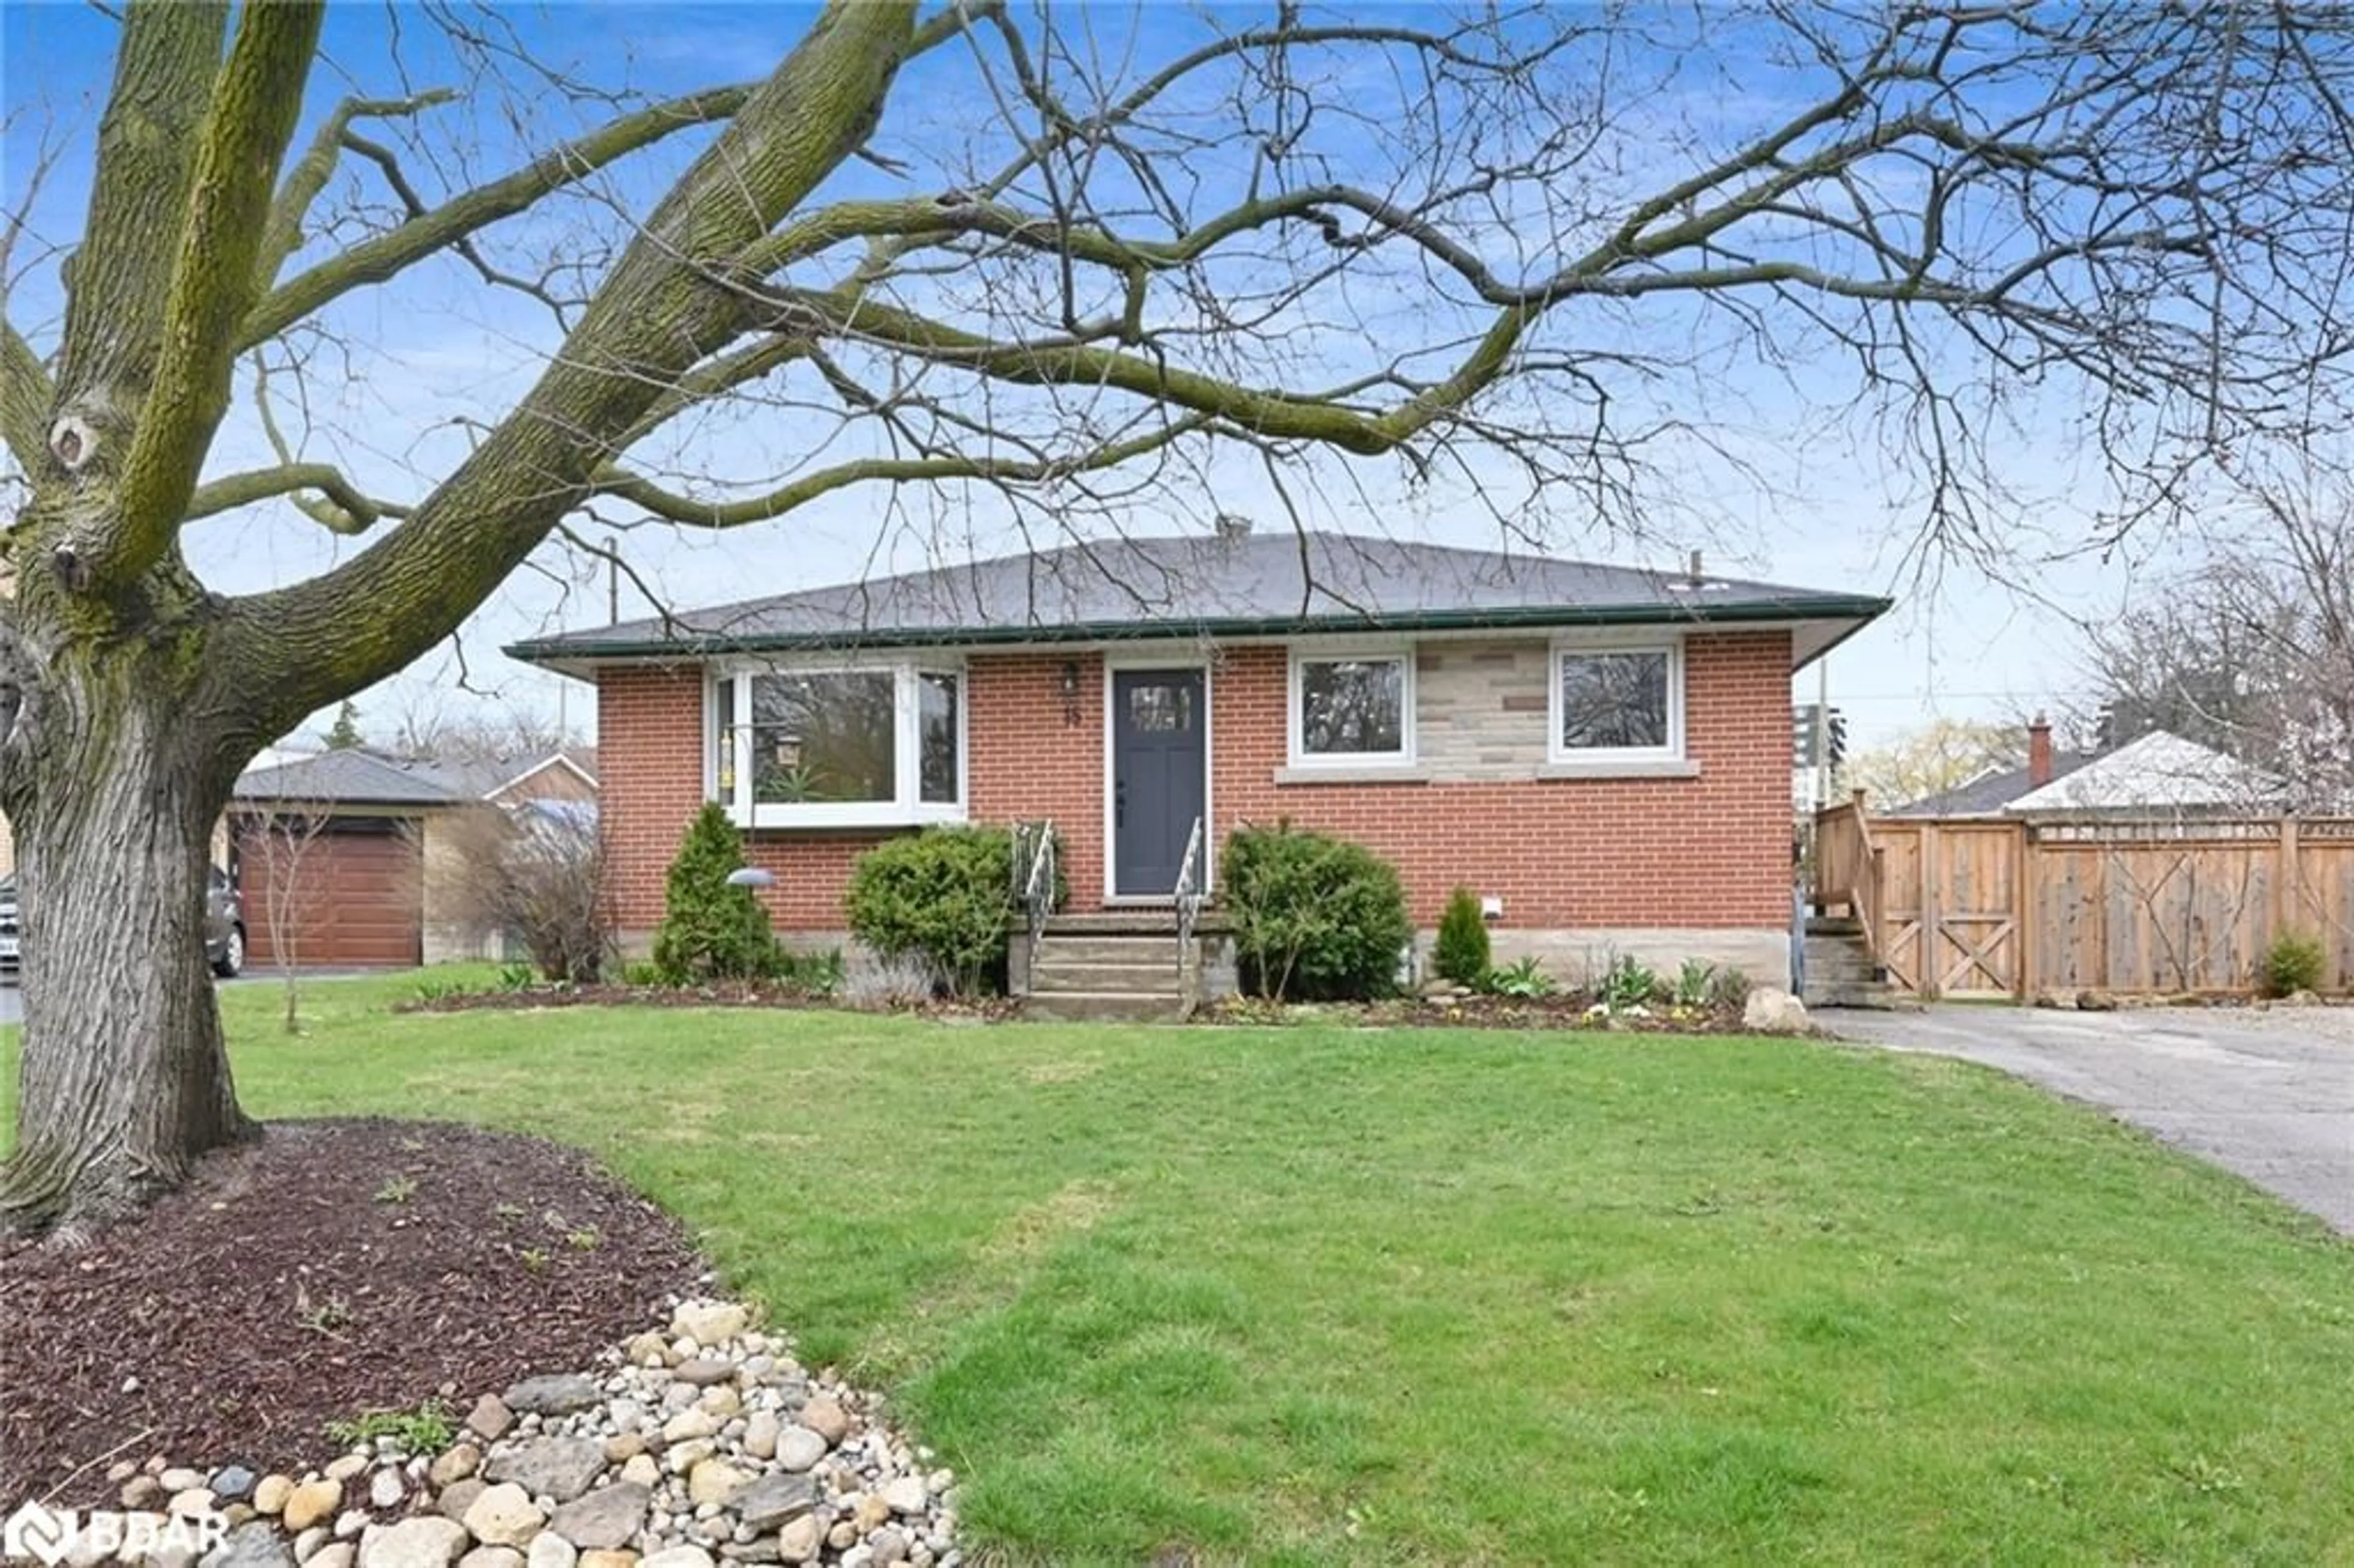 Home with brick exterior material for 15 Robertson Dr, Guelph Ontario N1H 4S8